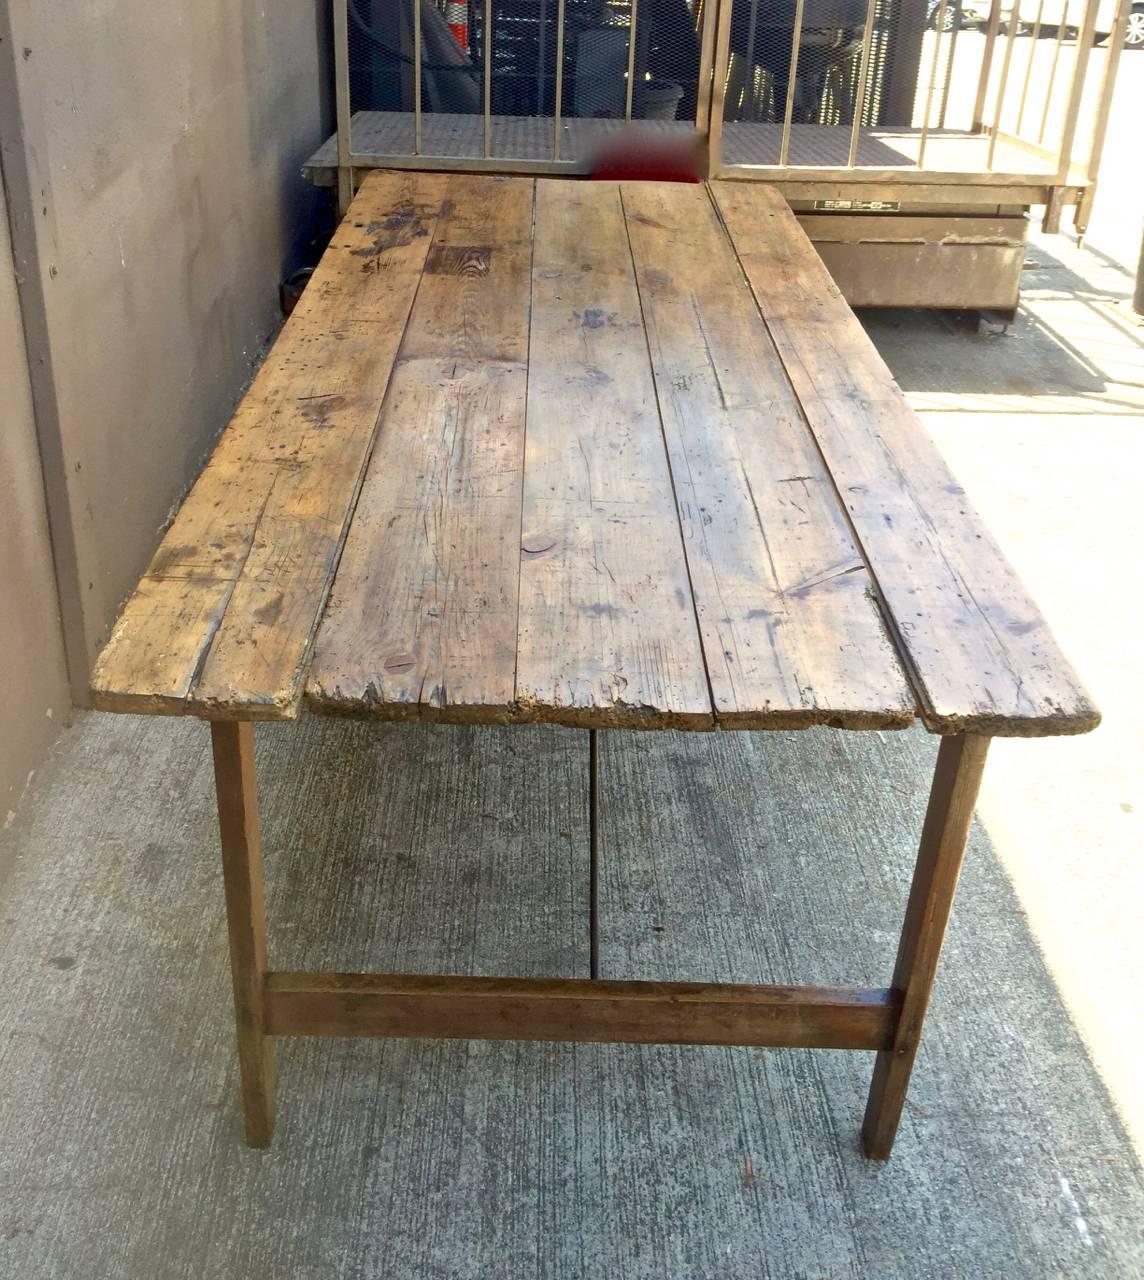 This is a n uncommon form of French harvest/farm table whose legs are braced with folding iron stretchers which allow the table to fold flat--great for shipping. The original waxed pine surface is in excellent patinated condition and has just had a